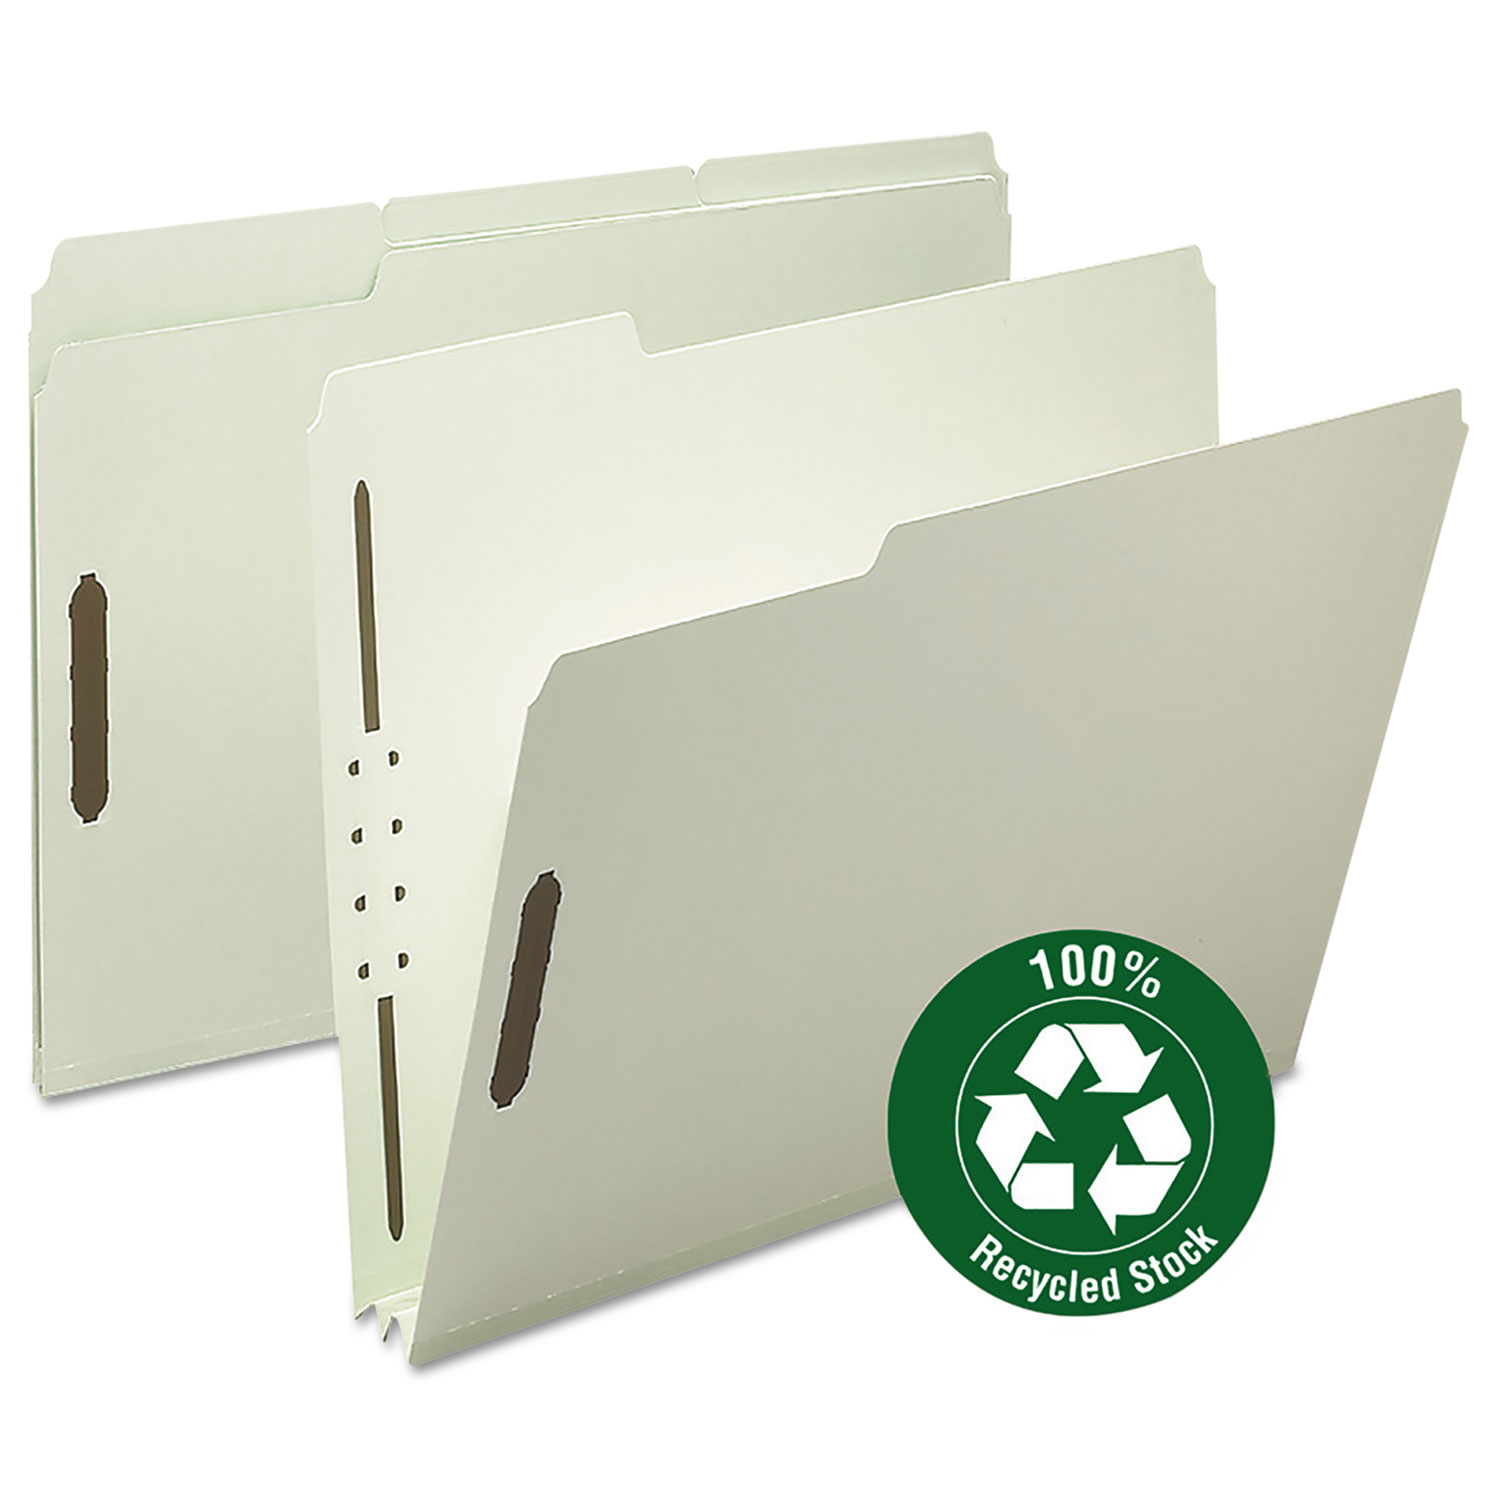  Smead 15004 100% Recycled Pressboard Fastener Folders, Letter Size, Gray-Green, 25/Box (SMD15004) 